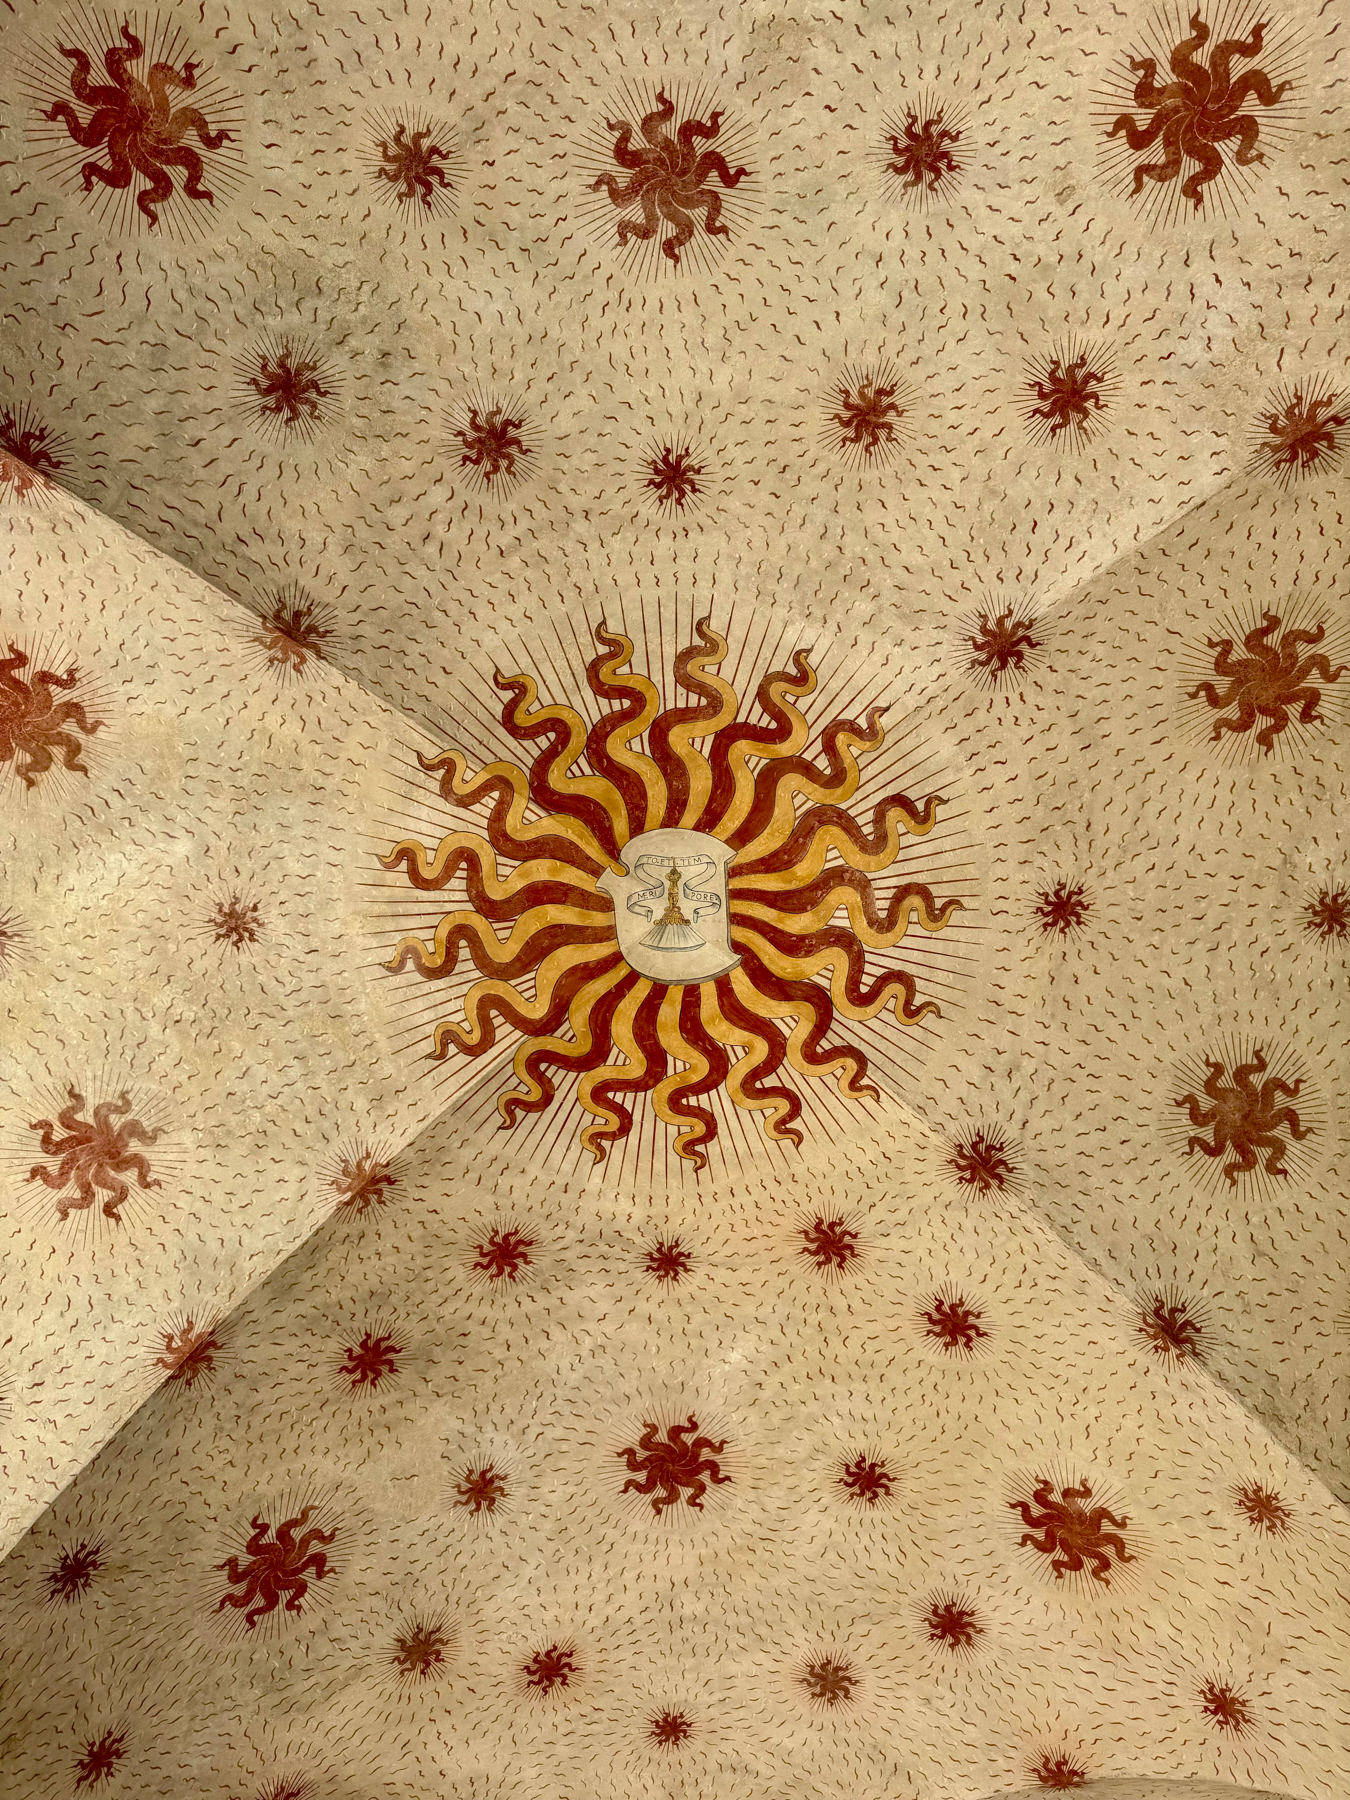 An ornate ceiling design featuring a central sunburst motif with red and yellow rays, surrounded by smaller sunburst patterns. The background is filled with tiny swirling lines, creating a sense of dynamic movement.